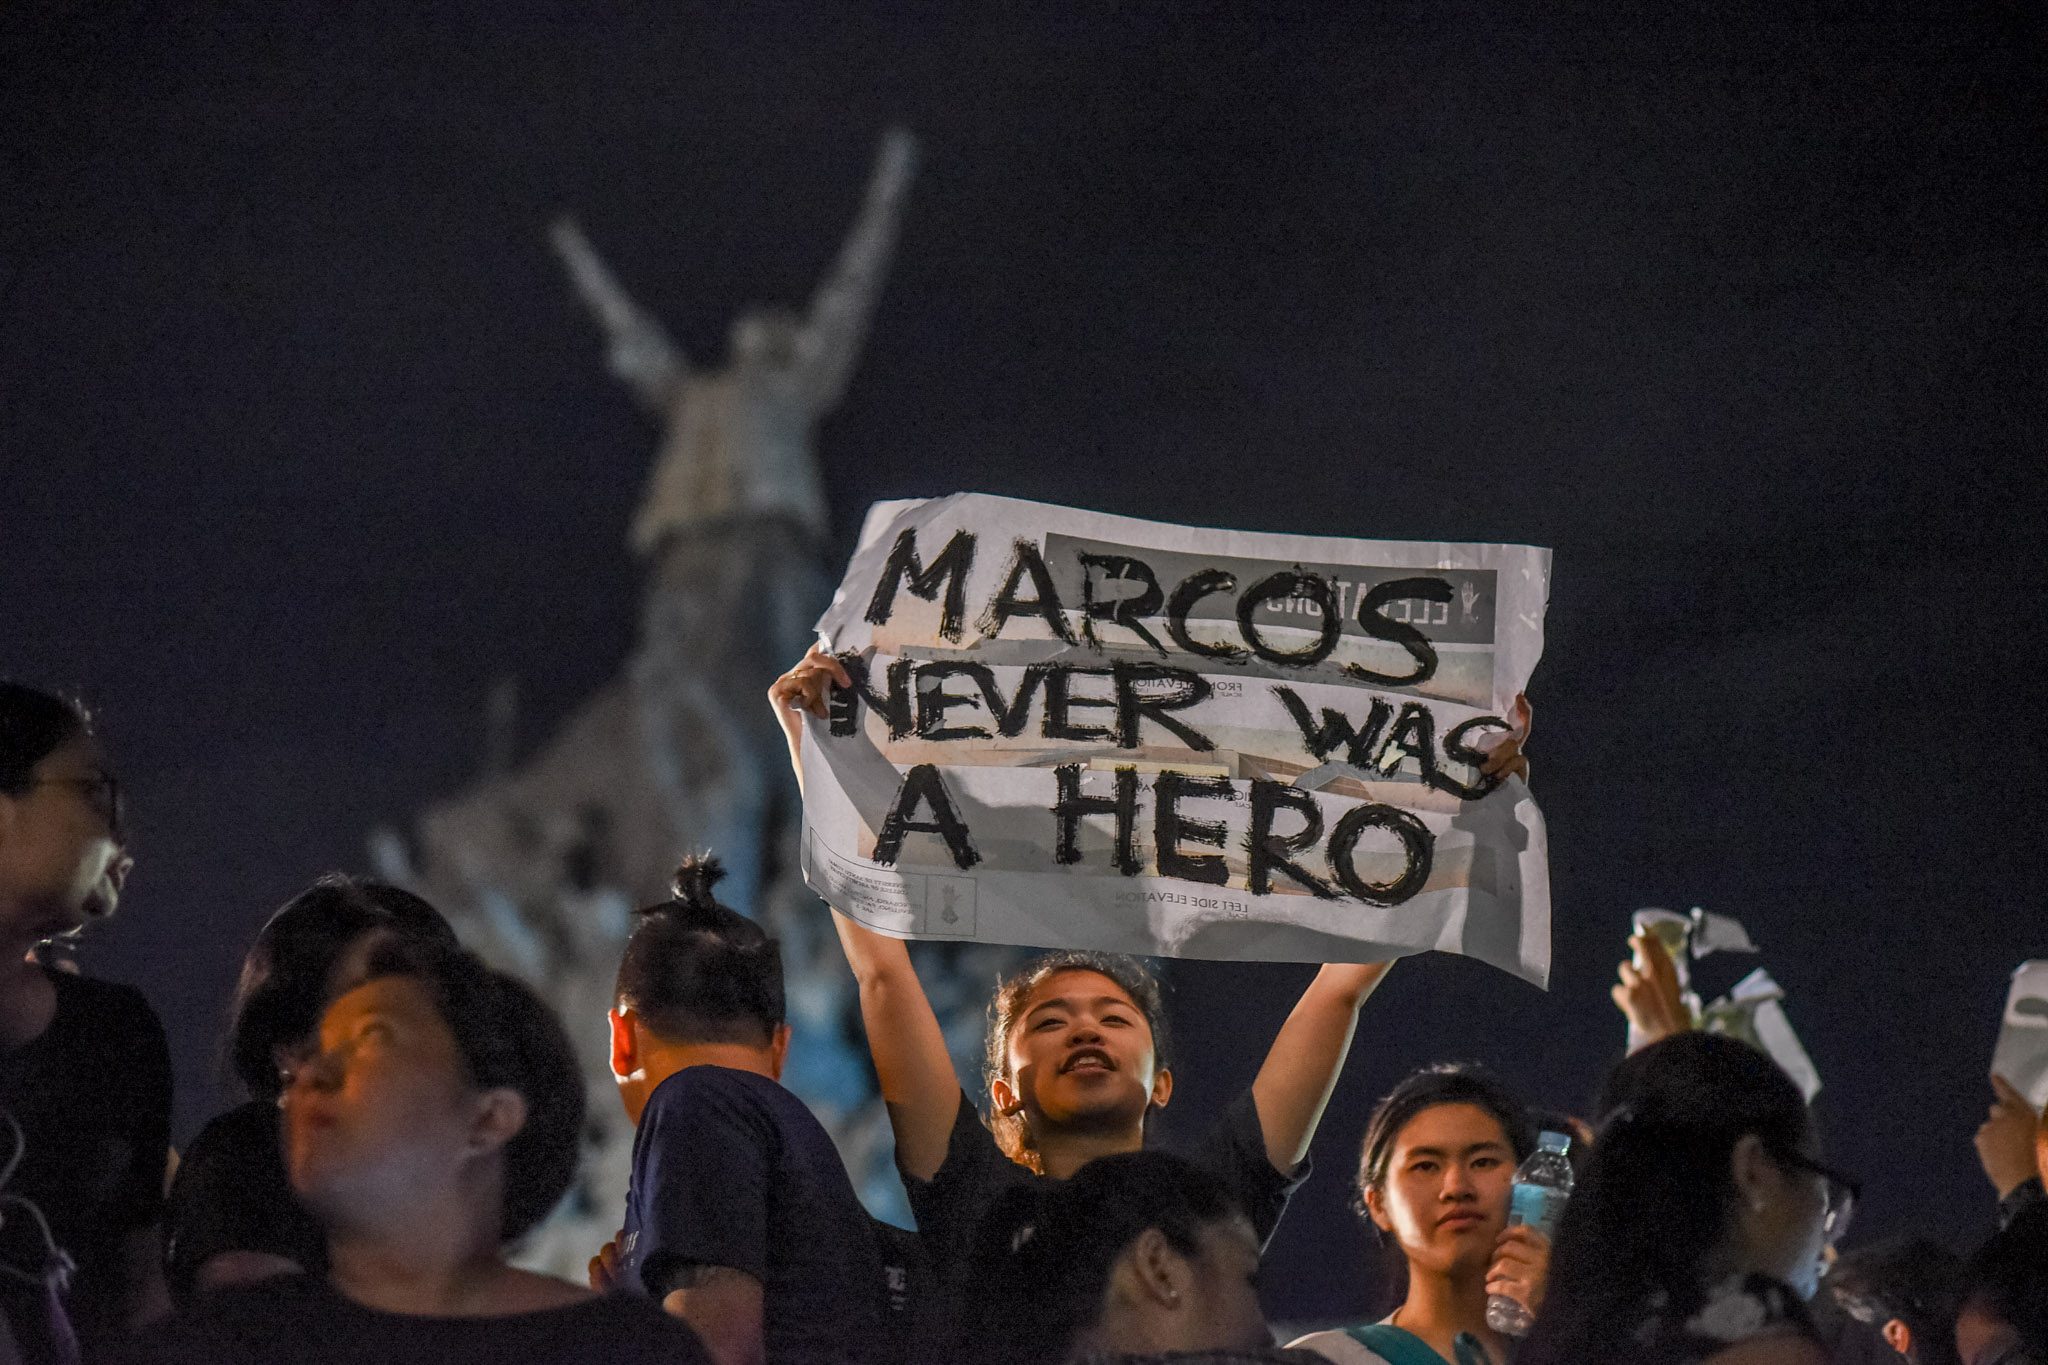 CPP urges Duterte on Marcos burial: ‘Reverse this historical wrong’